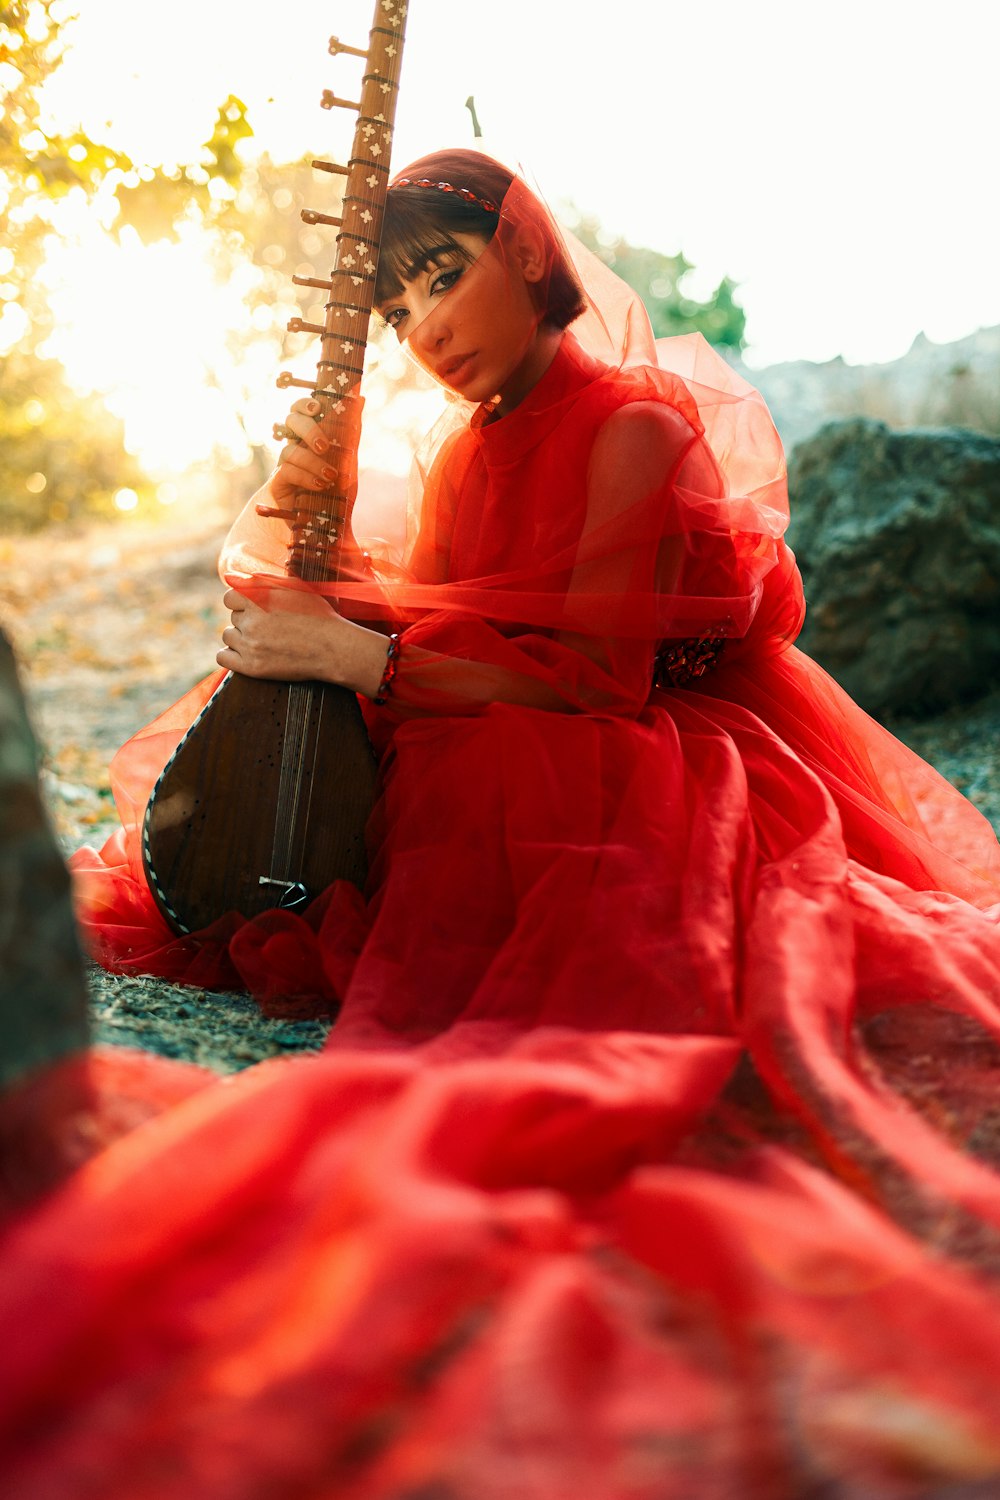 a woman in a red dress is holding a guitar